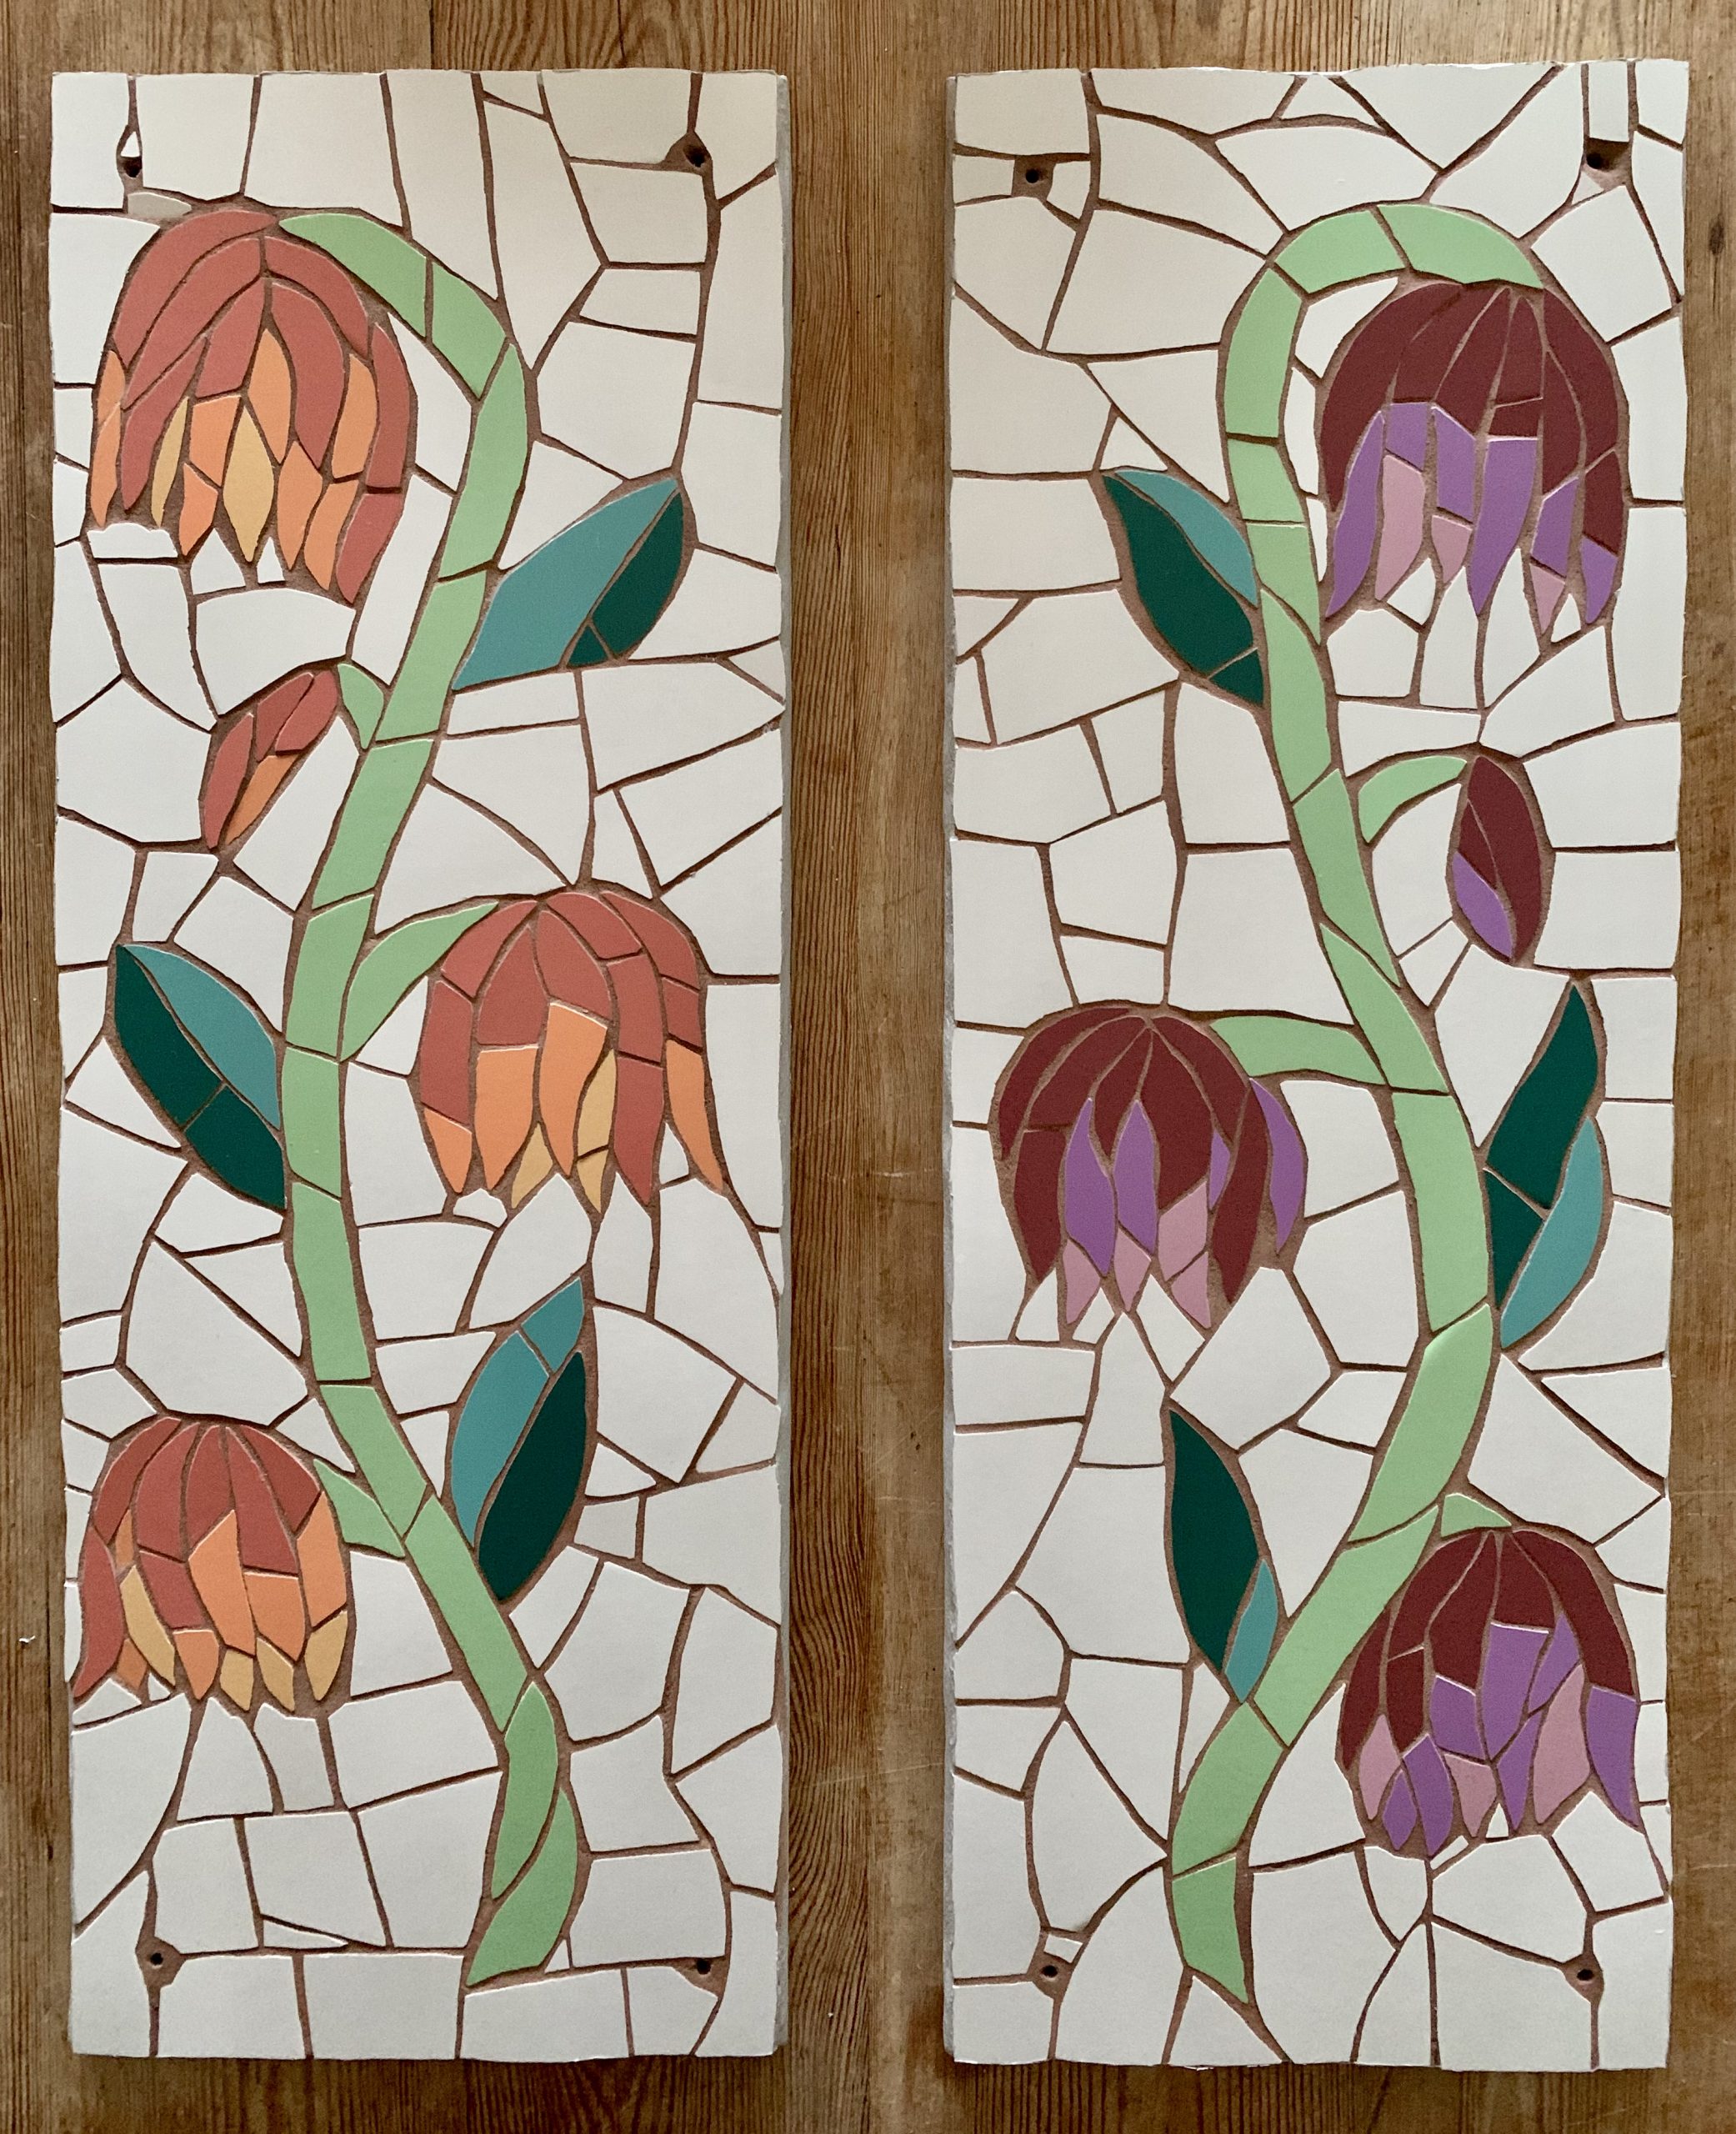 My latest commission is two exterior mosaic flower panels.